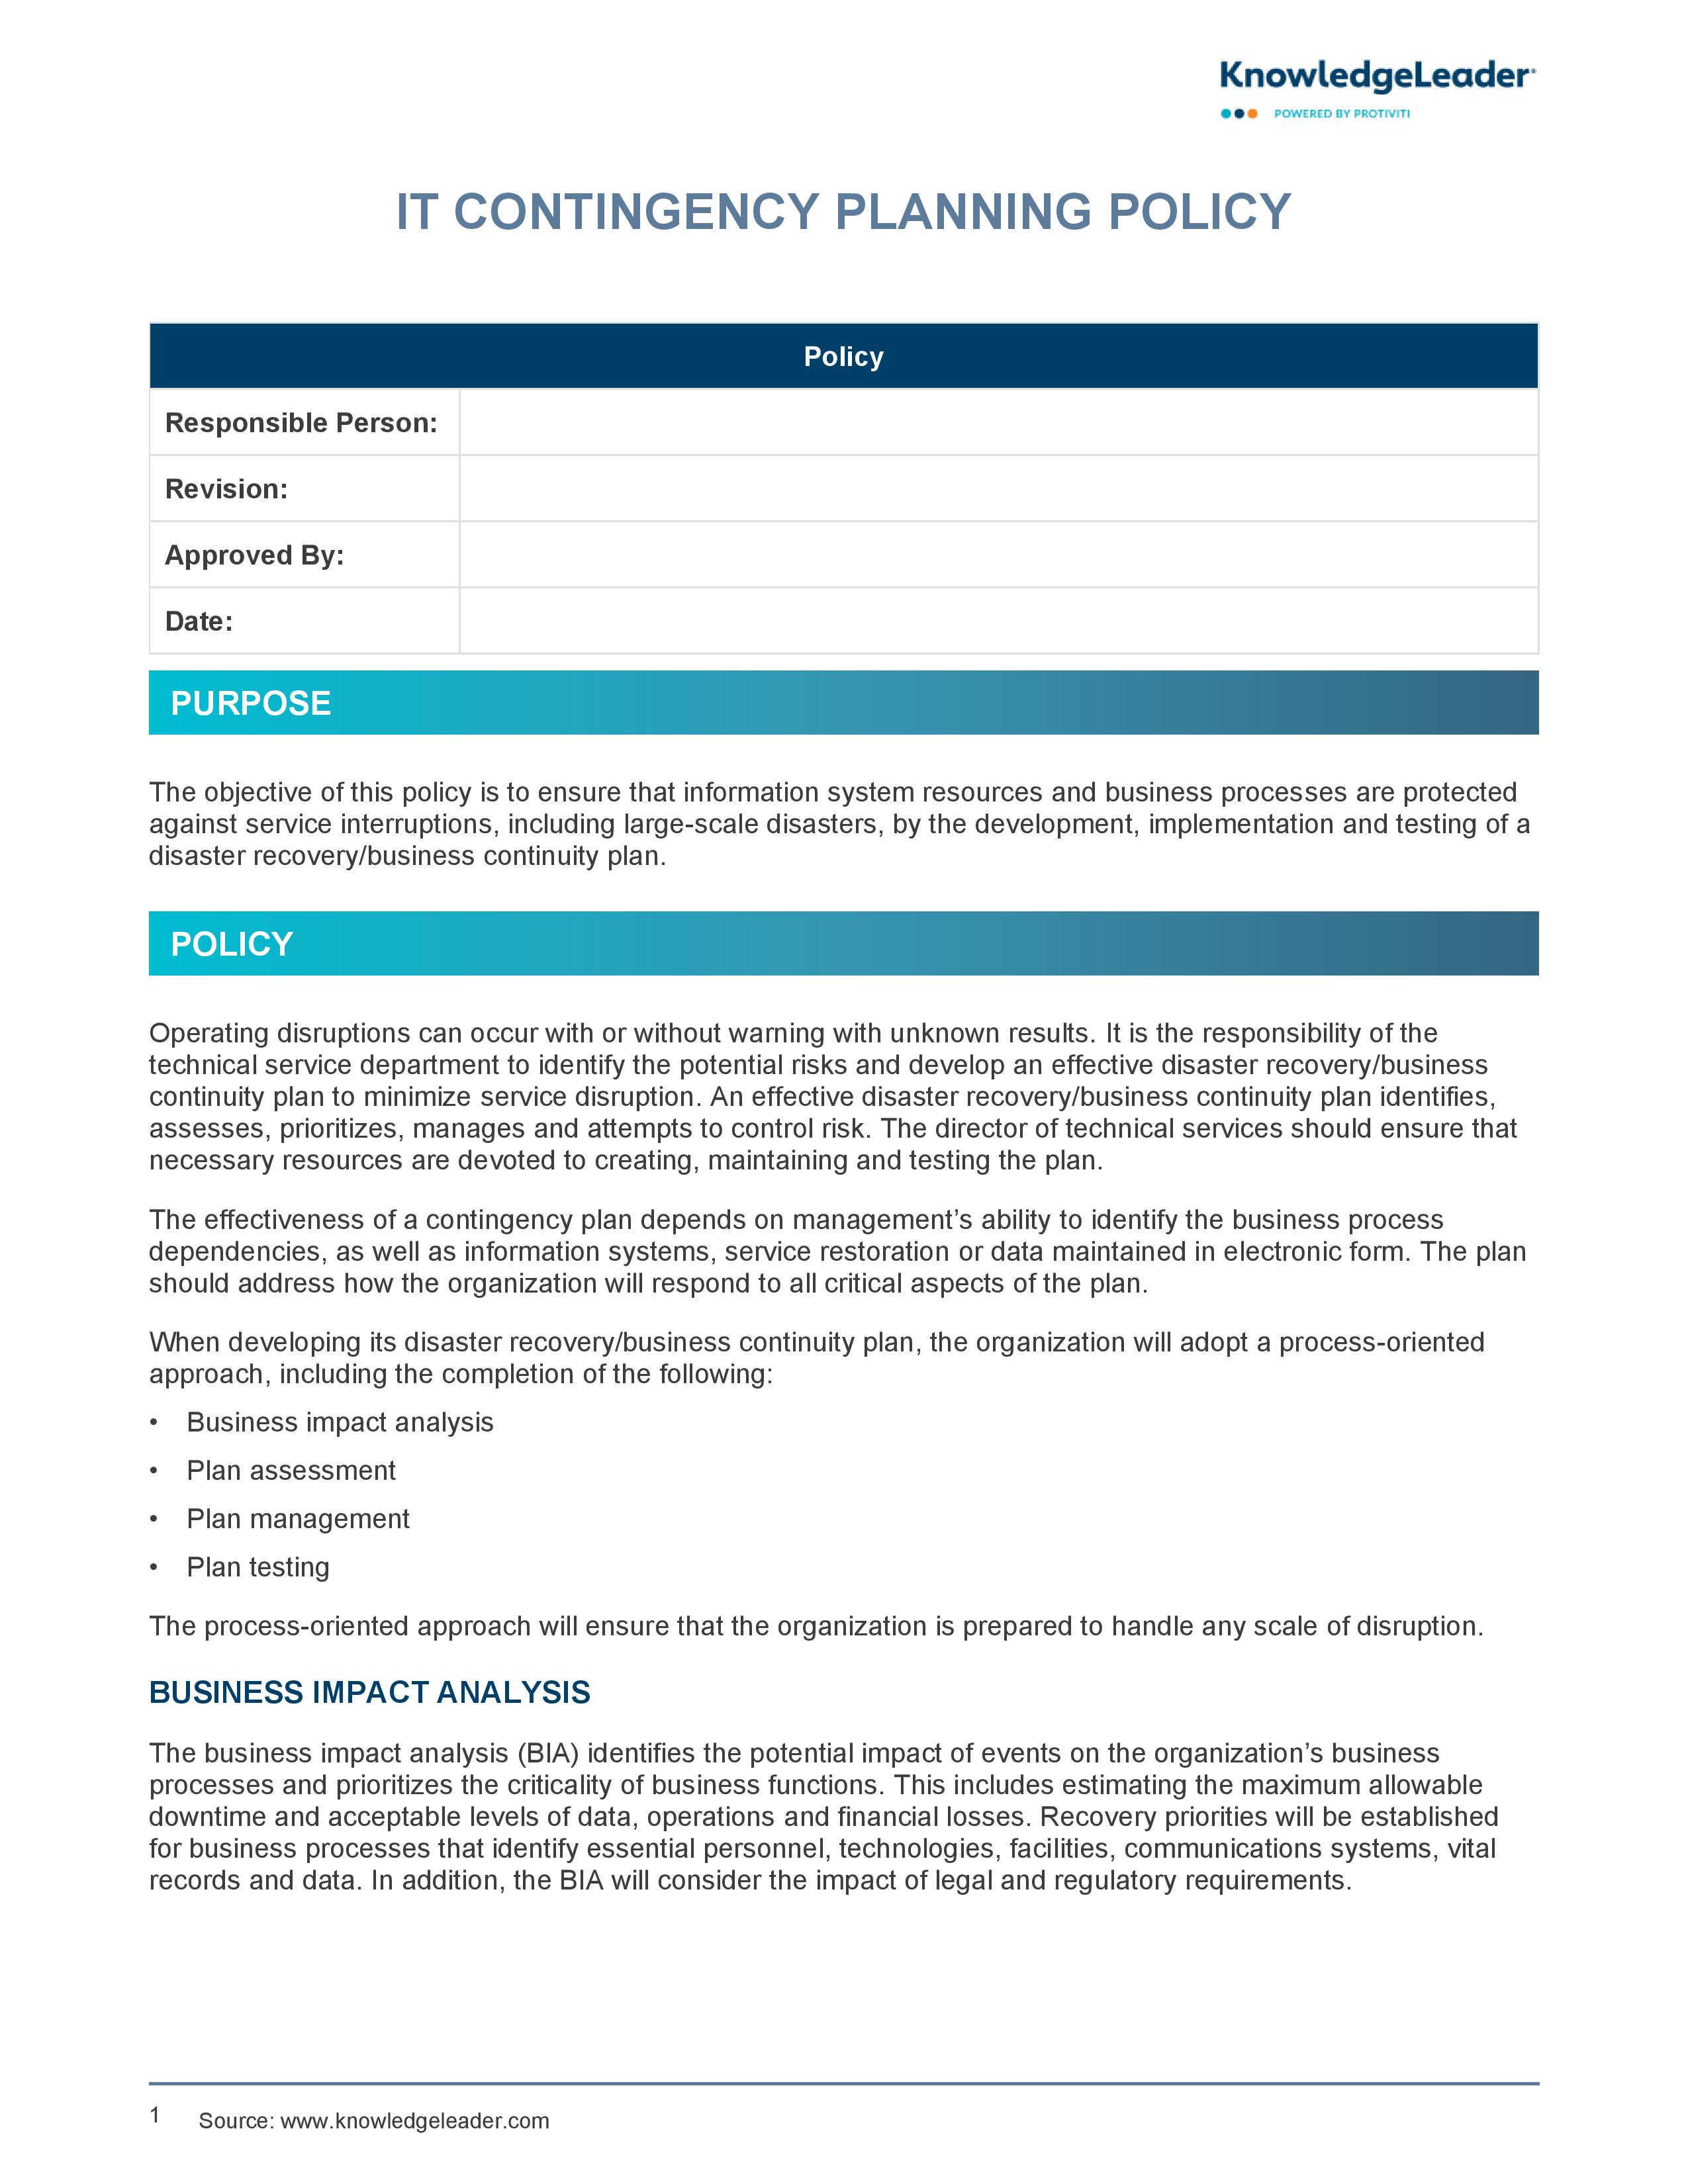 screenshot of the first page of IT Contingency Planning Policy